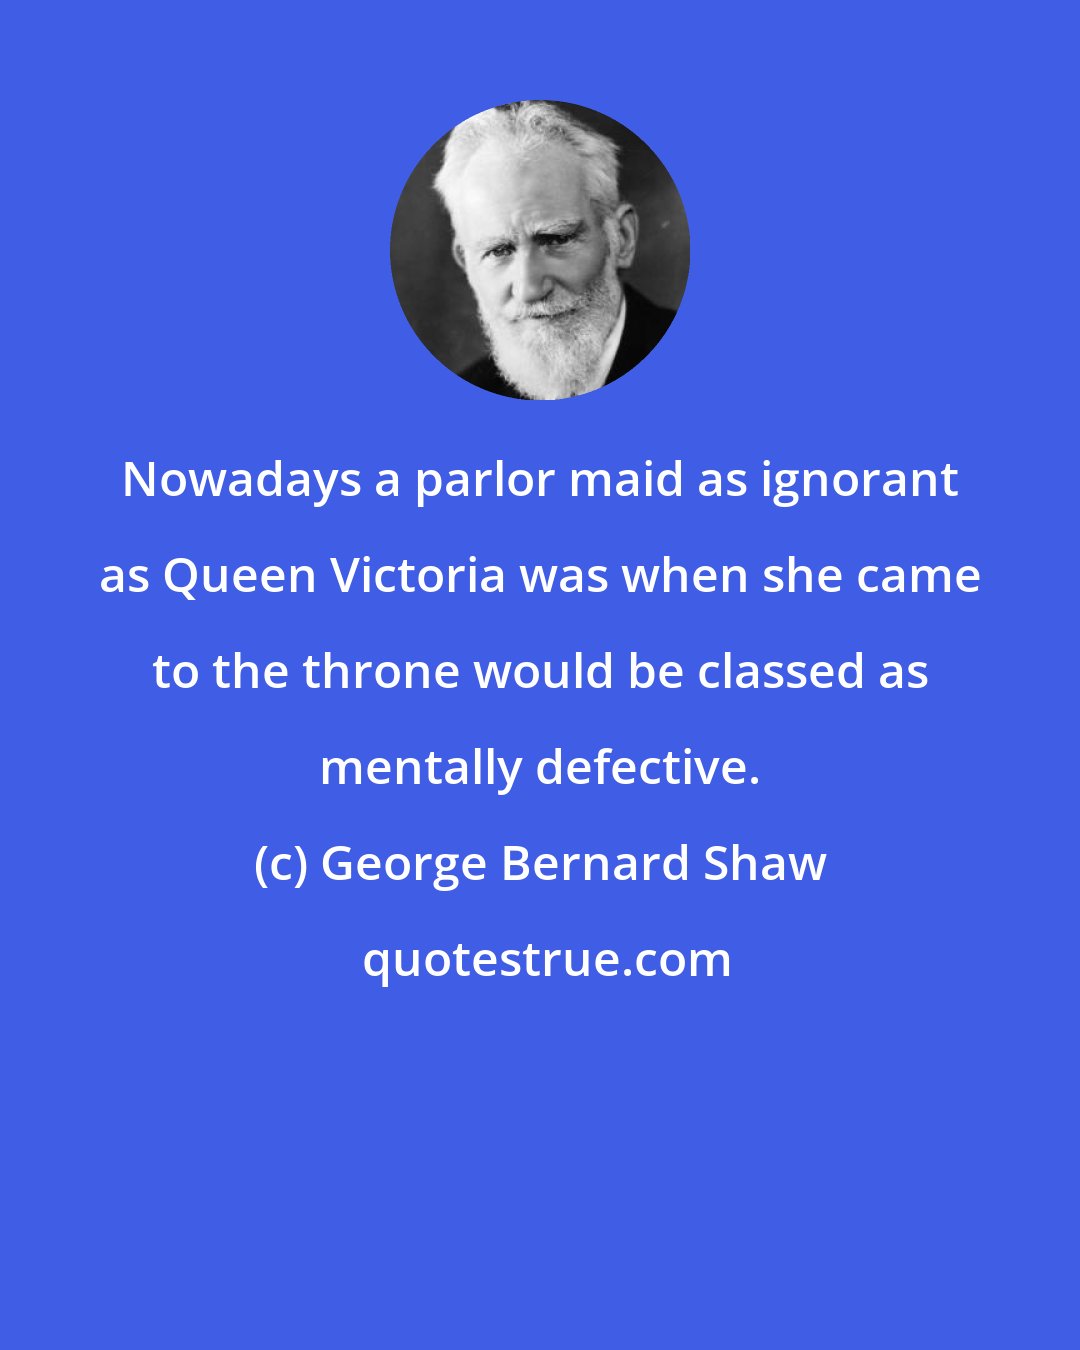 George Bernard Shaw: Nowadays a parlor maid as ignorant as Queen Victoria was when she came to the throne would be classed as mentally defective.